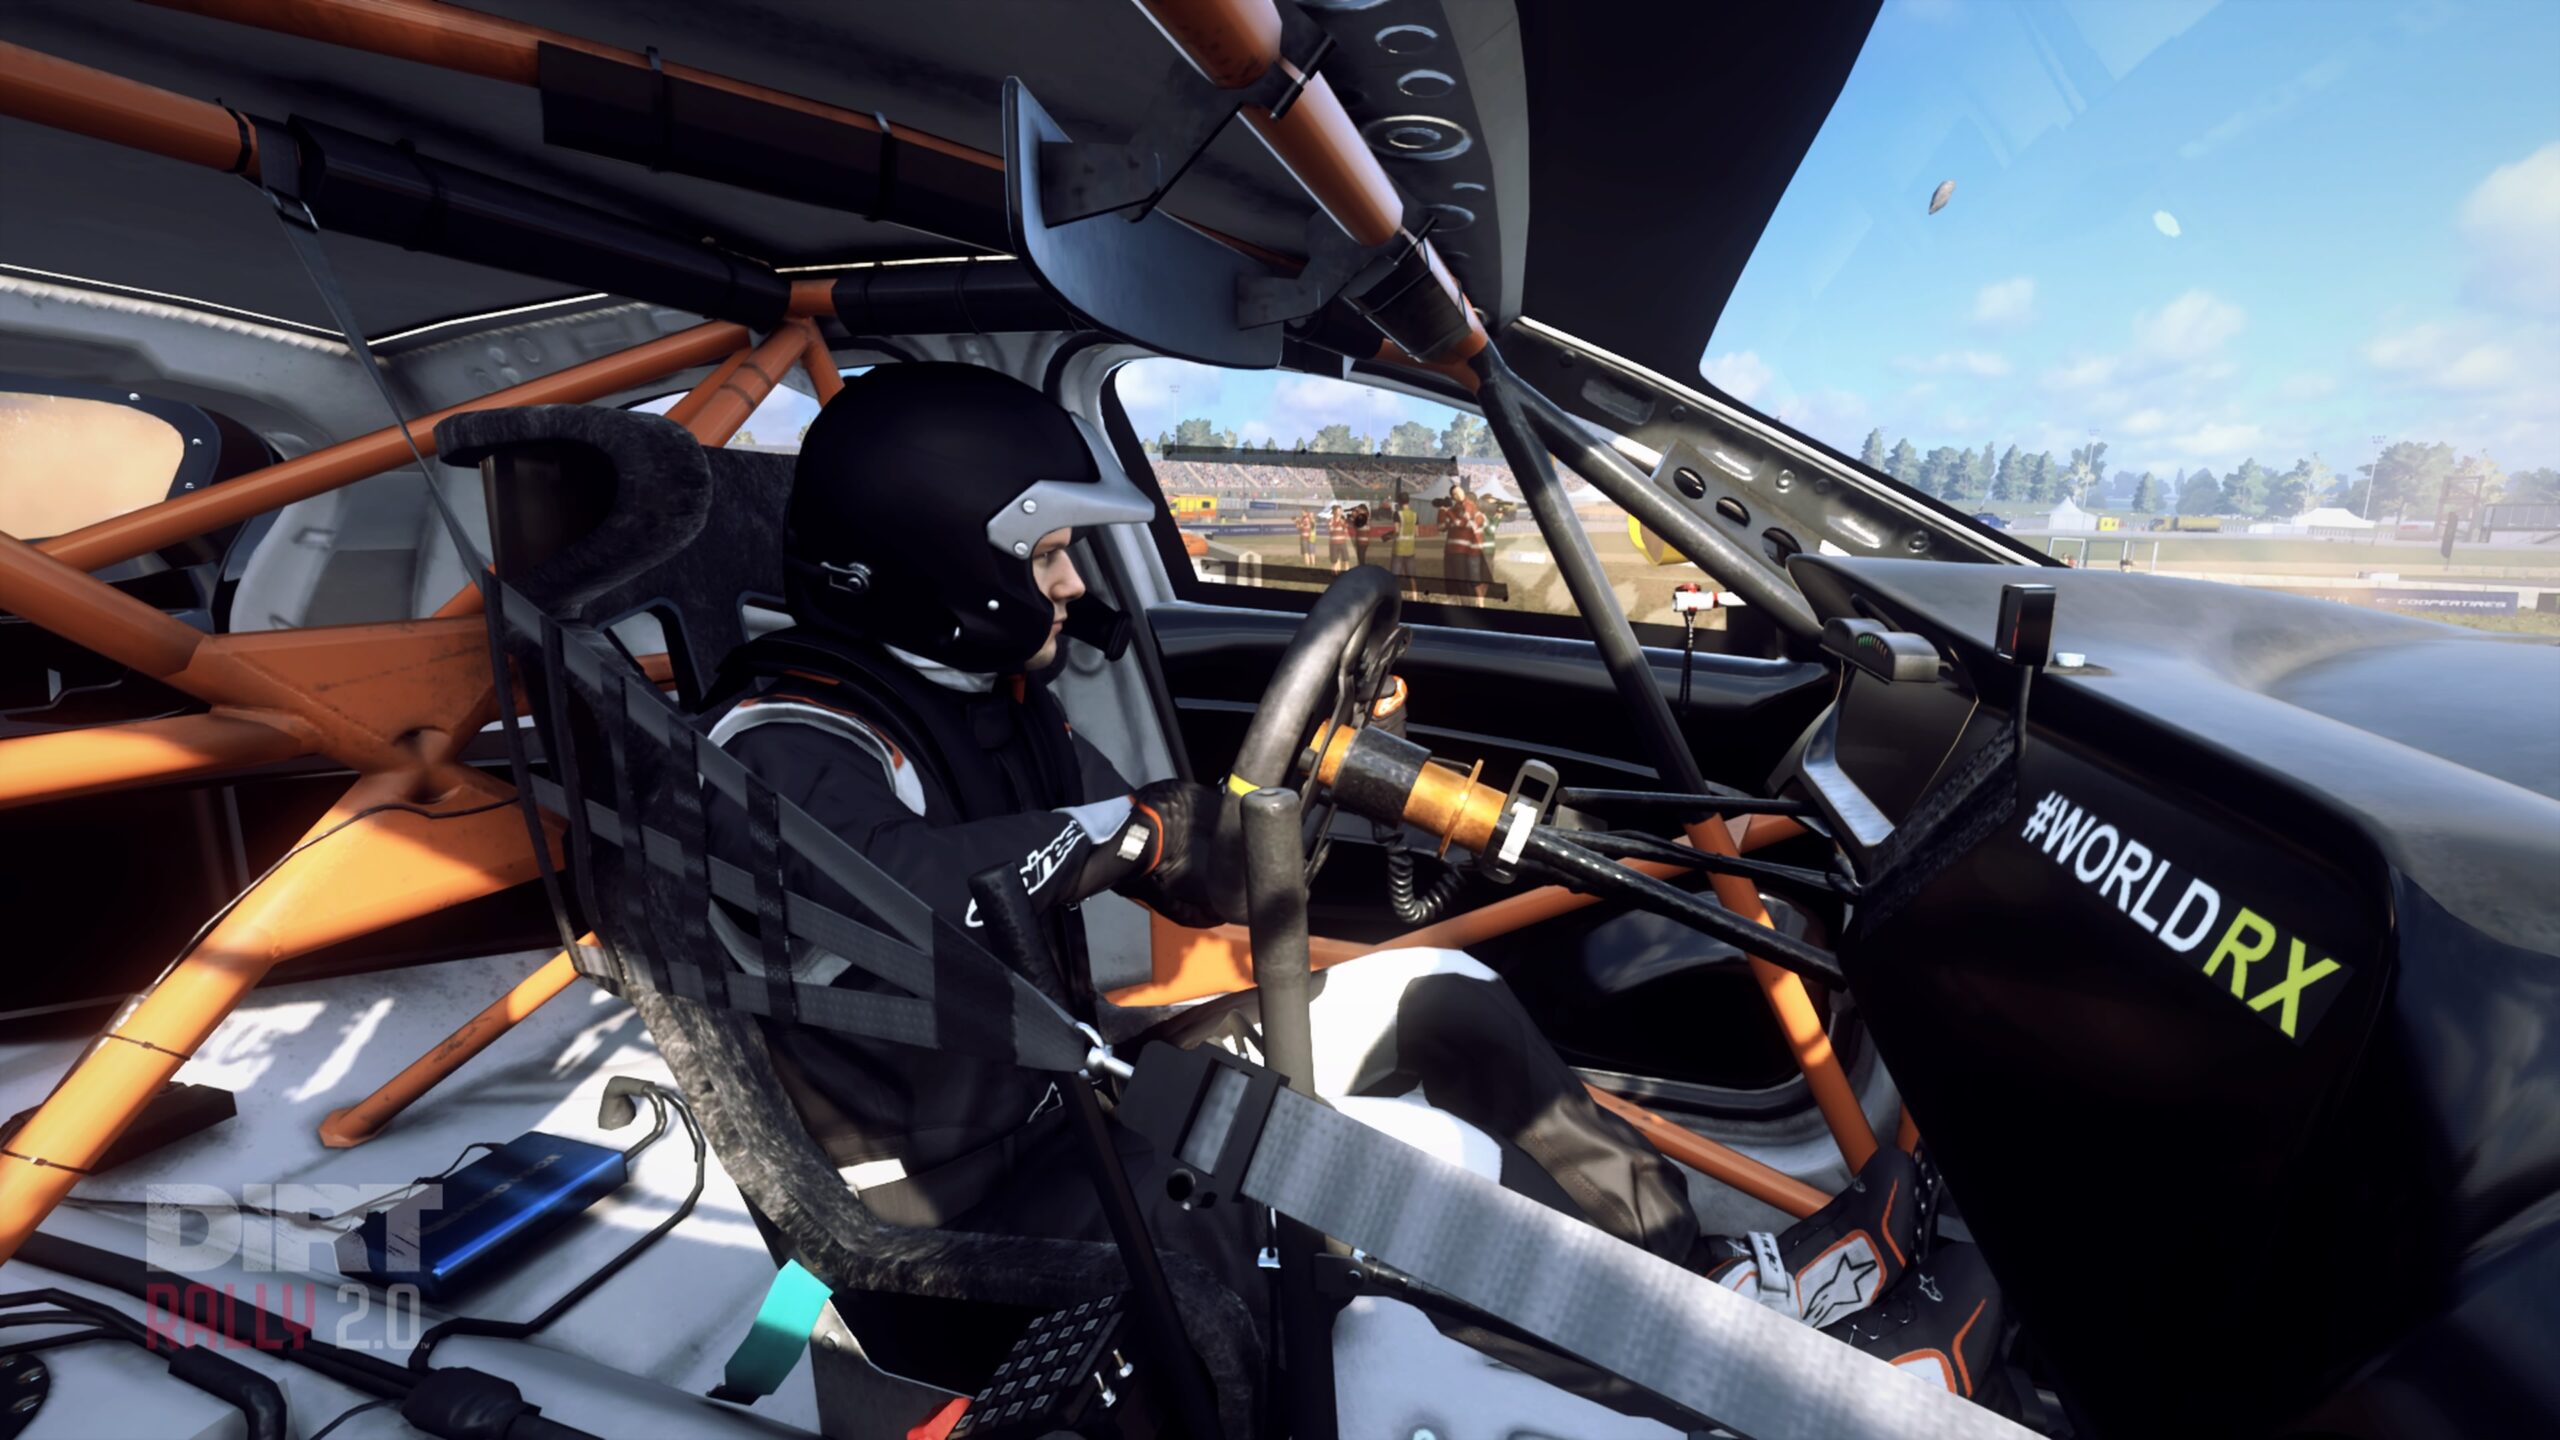 Motoring MMO The Crew is going offline in March, making it